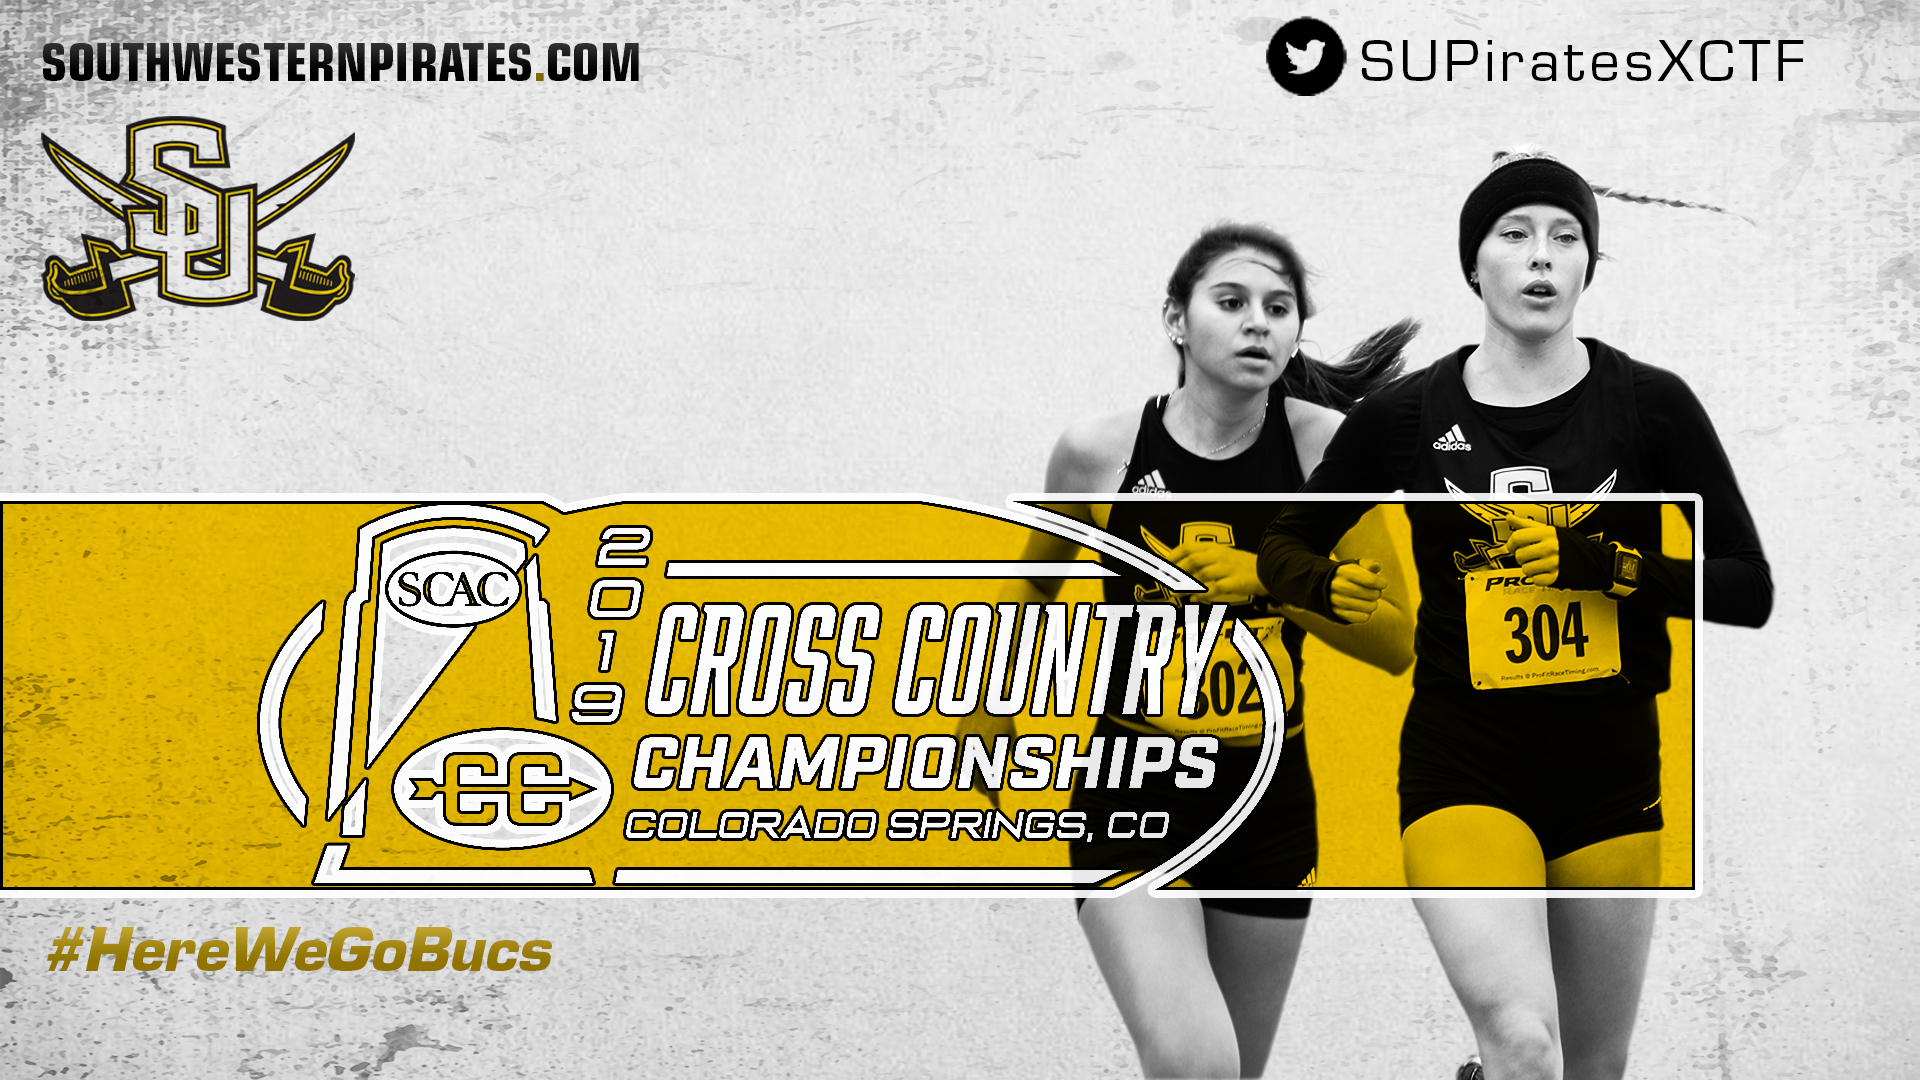 [PREVIEW] Women's Cross Country Looks To Push Past Limits At SCAC Championships